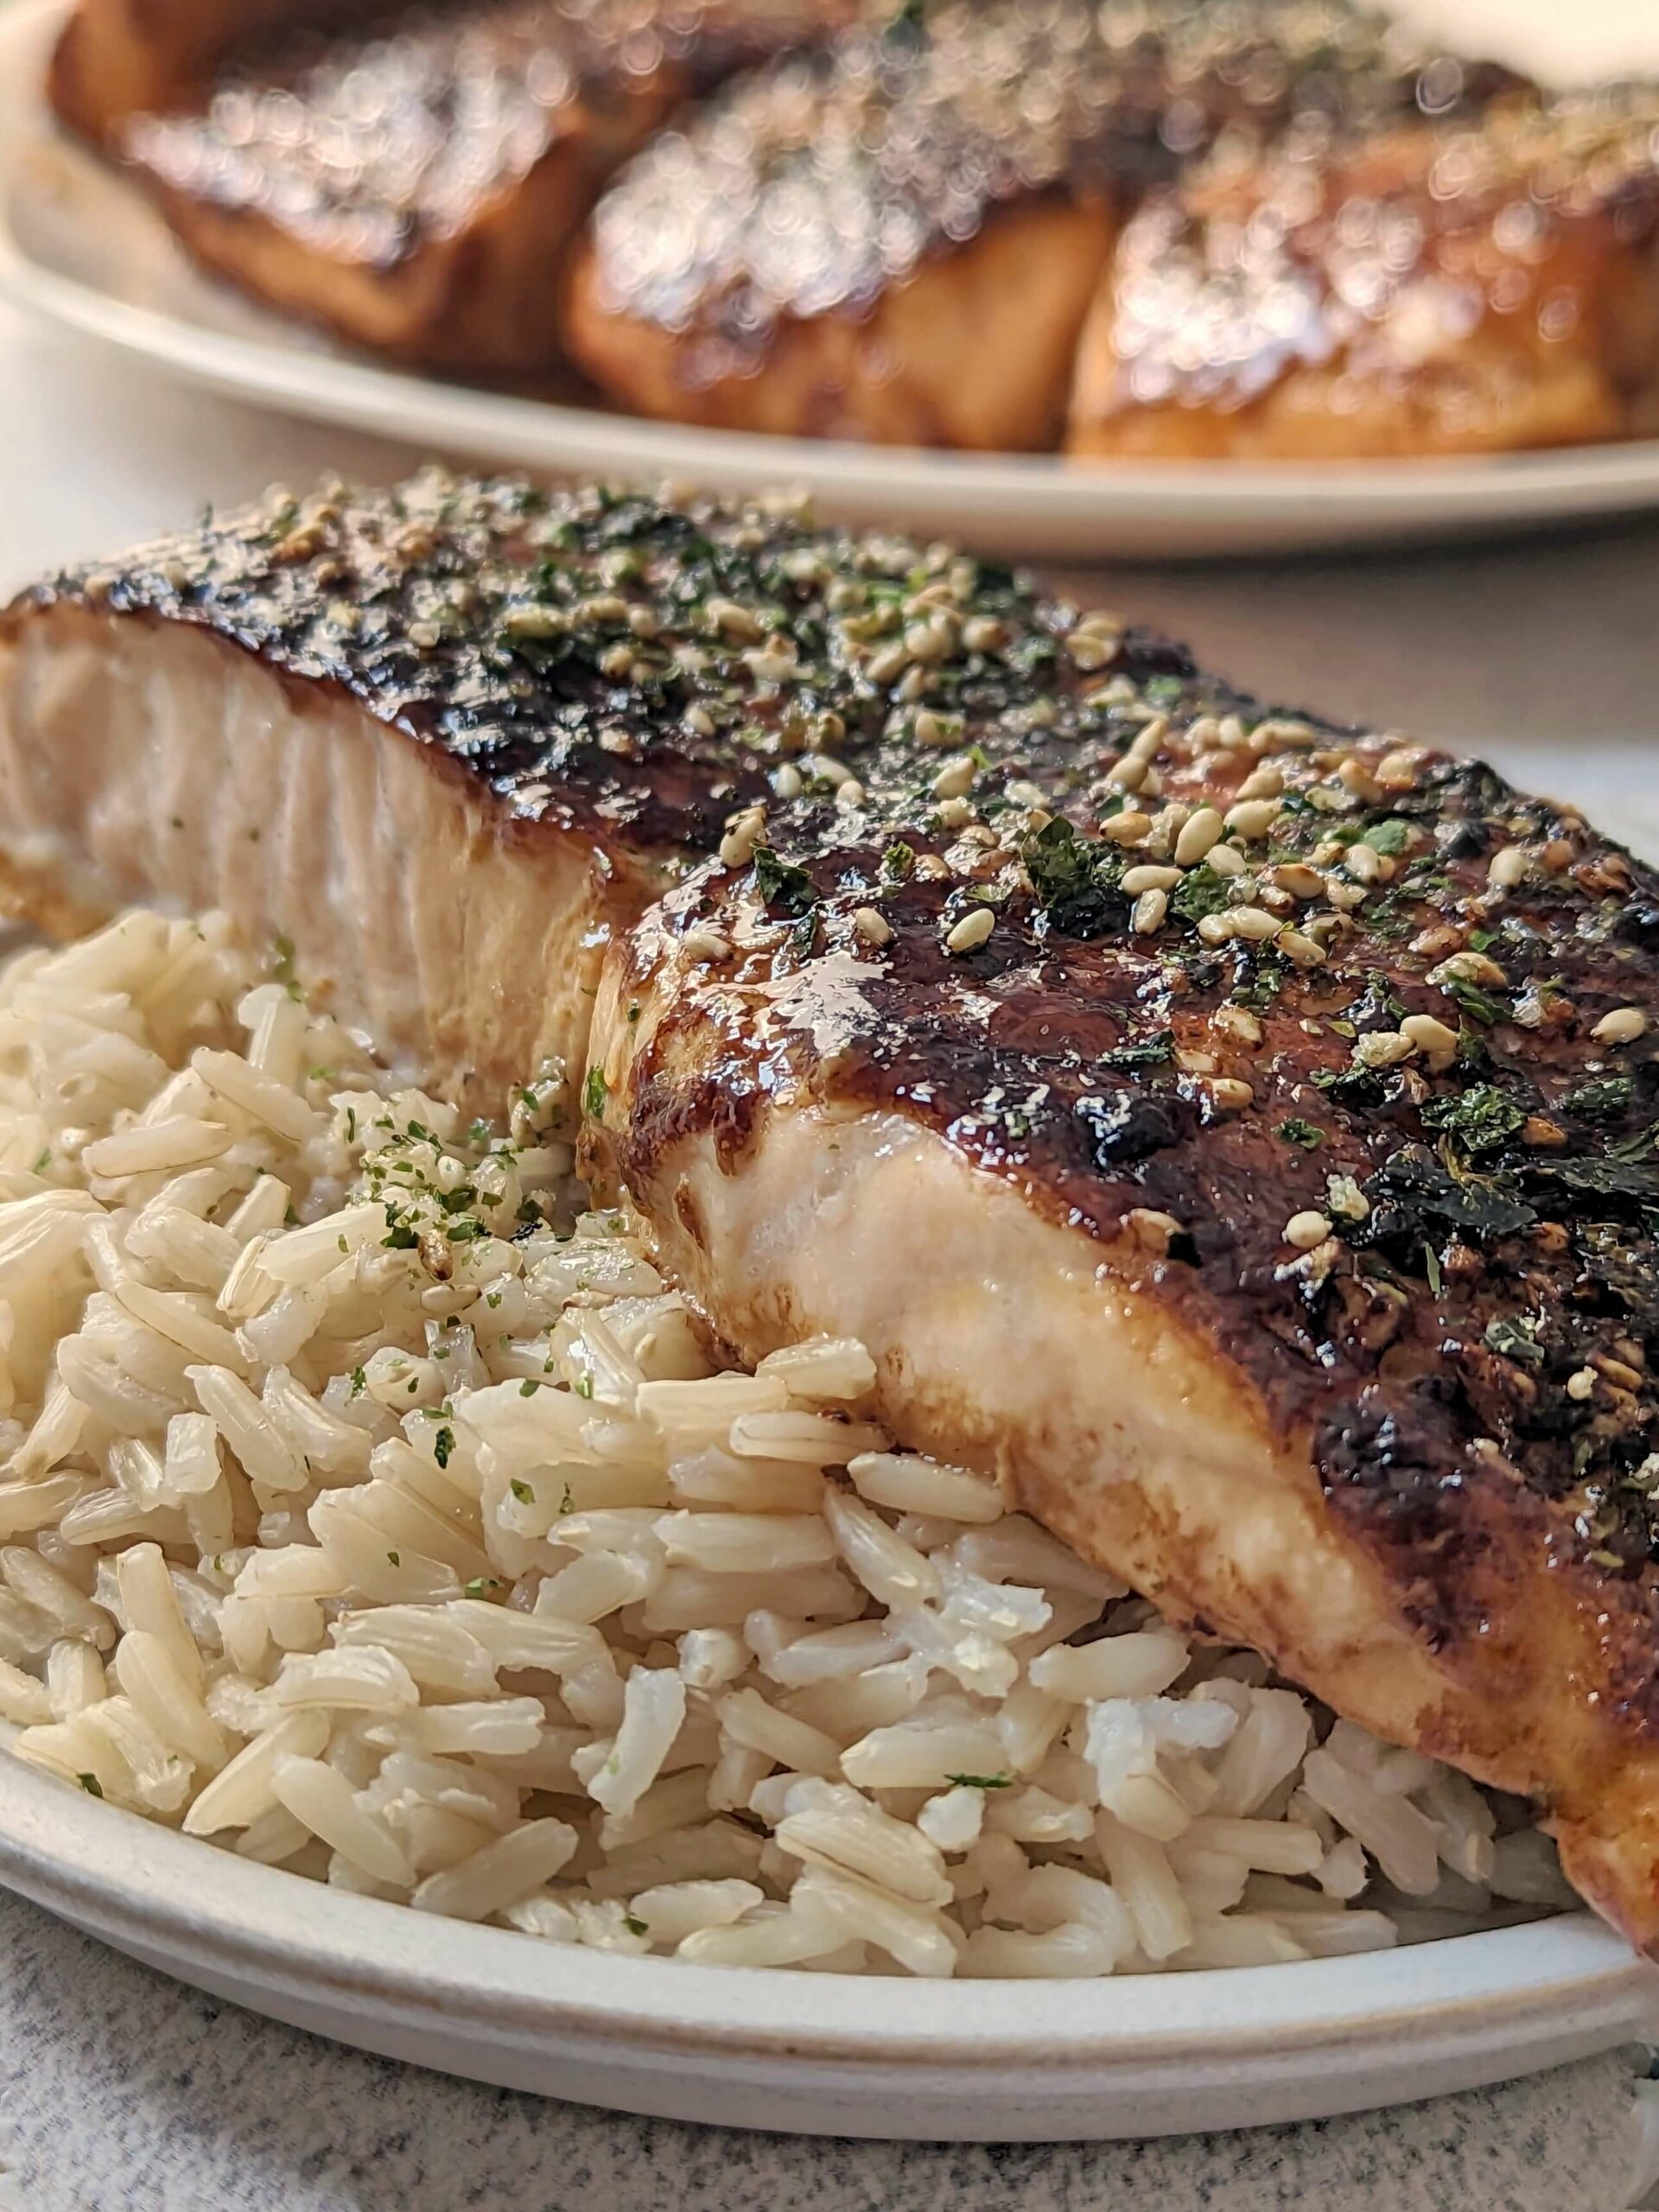 A fillet of furikake salmon served on a bed of rice.